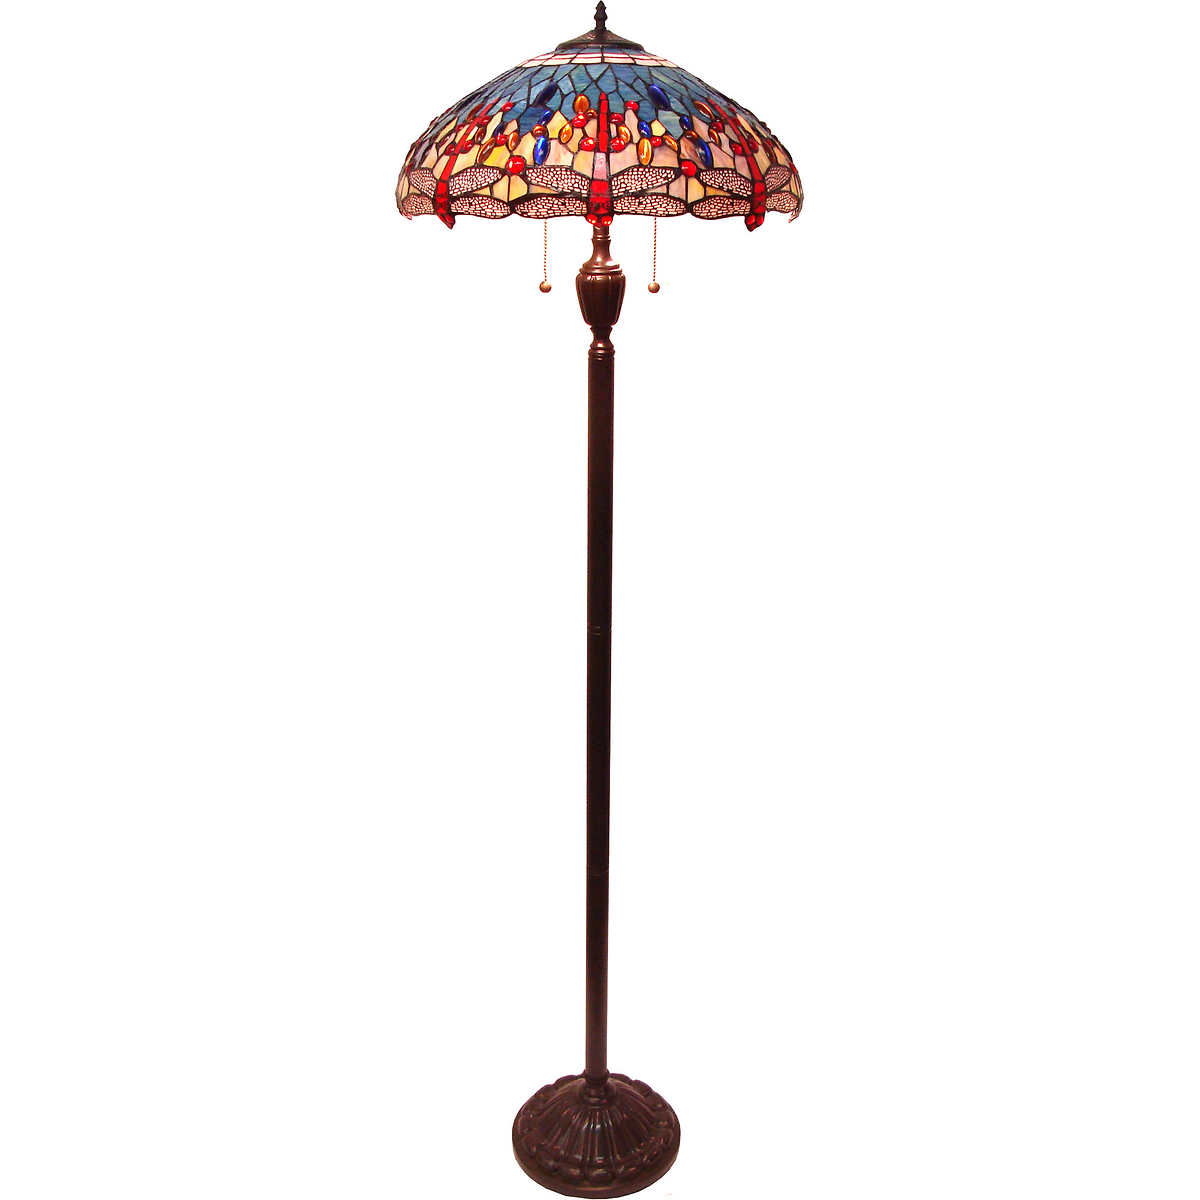 How do you find sales on swag-style lamps?